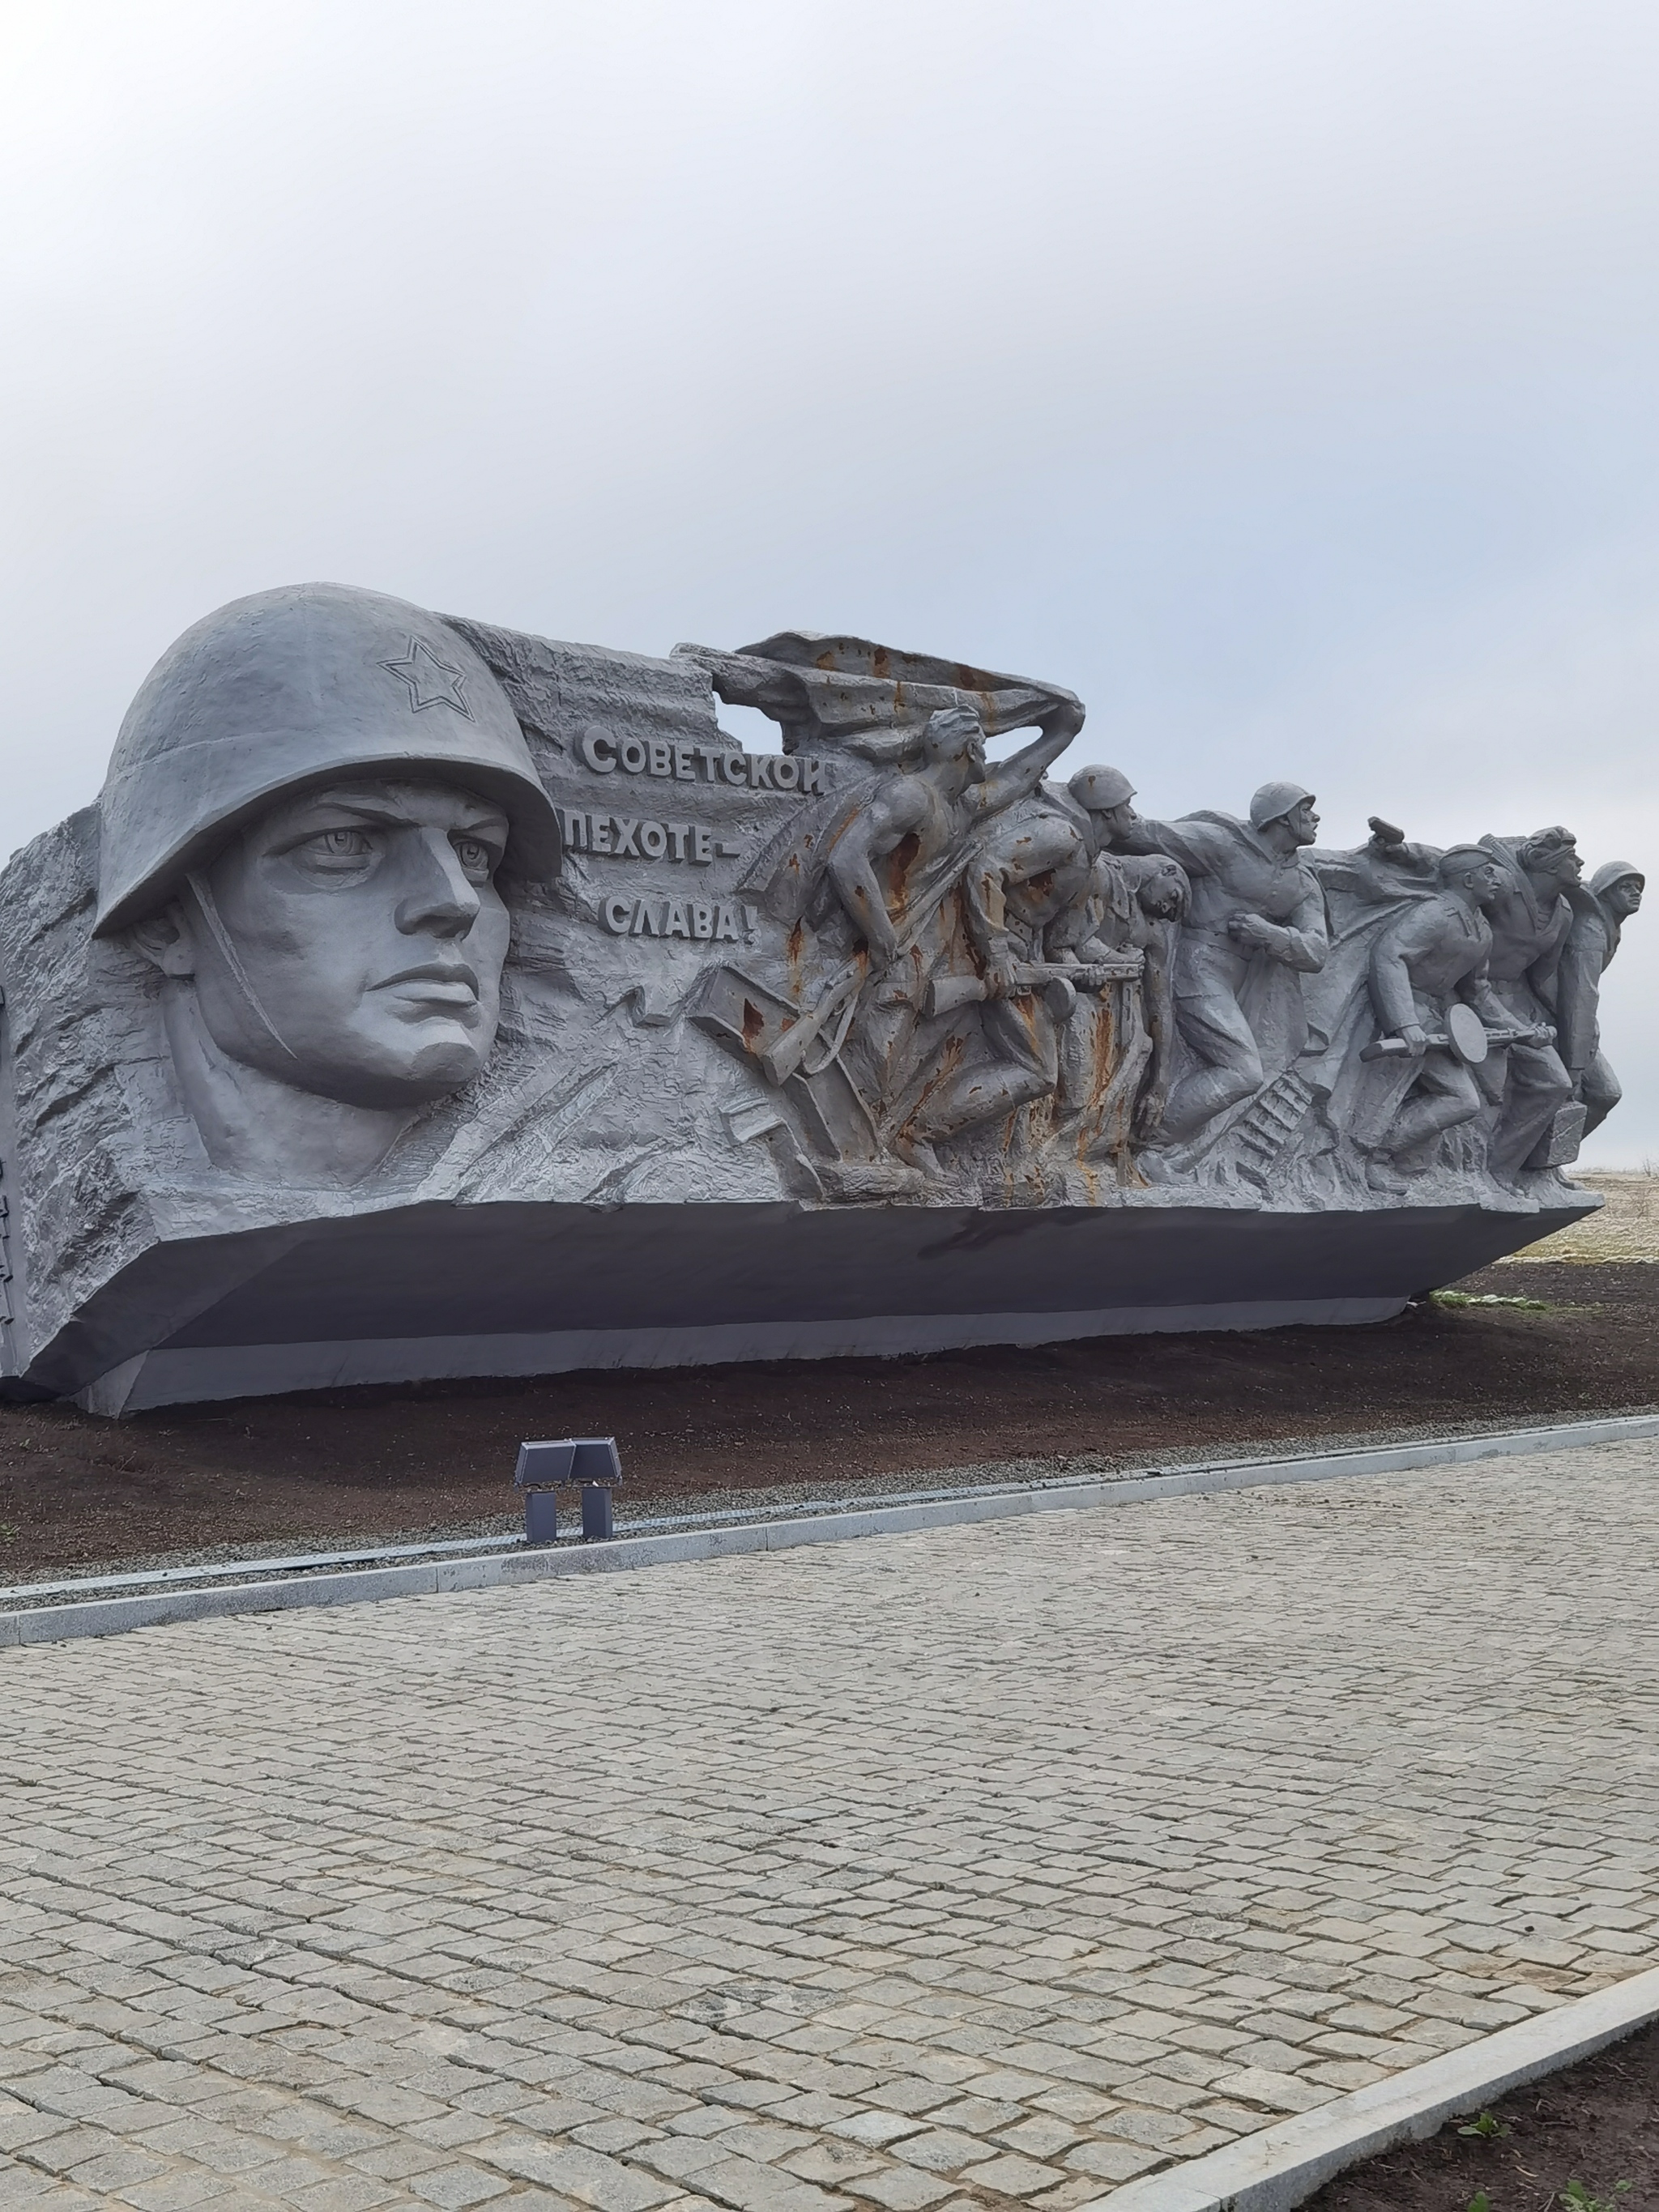 Response to the post Rzhev Memorial to a Soviet Soldier - Travel across Russia, Rzhev Memorial, The Great Patriotic War, Rzhev, Numbers, Monument, The photo, Mobile photography, Saur-Mogila, Reply to post, Longpost, Memorial, Donbass